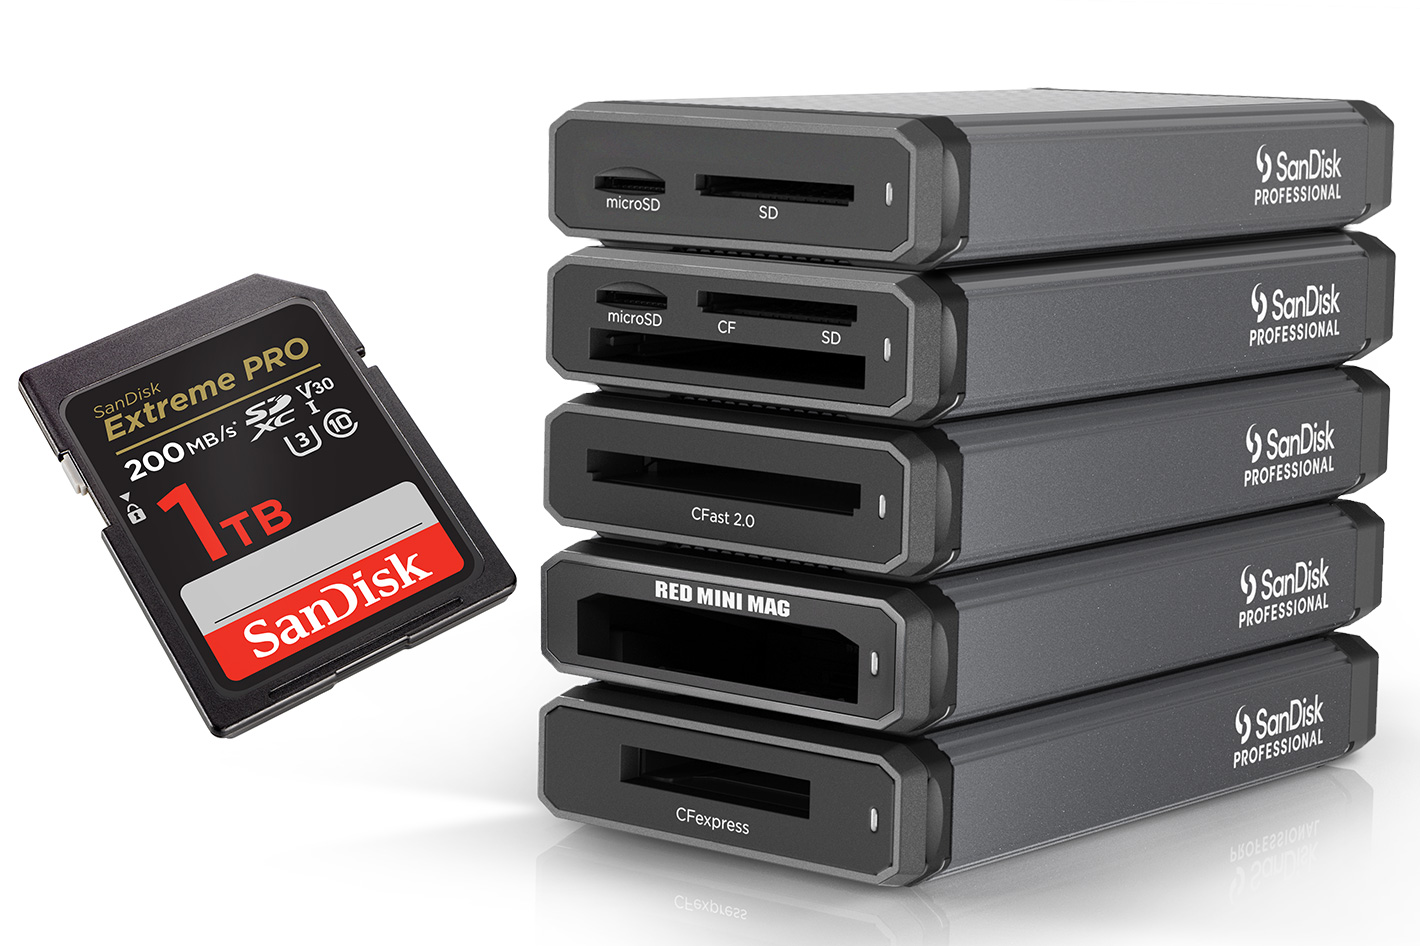 SanDisk Professional PRO-BLADE SSD: A system designed for content creators